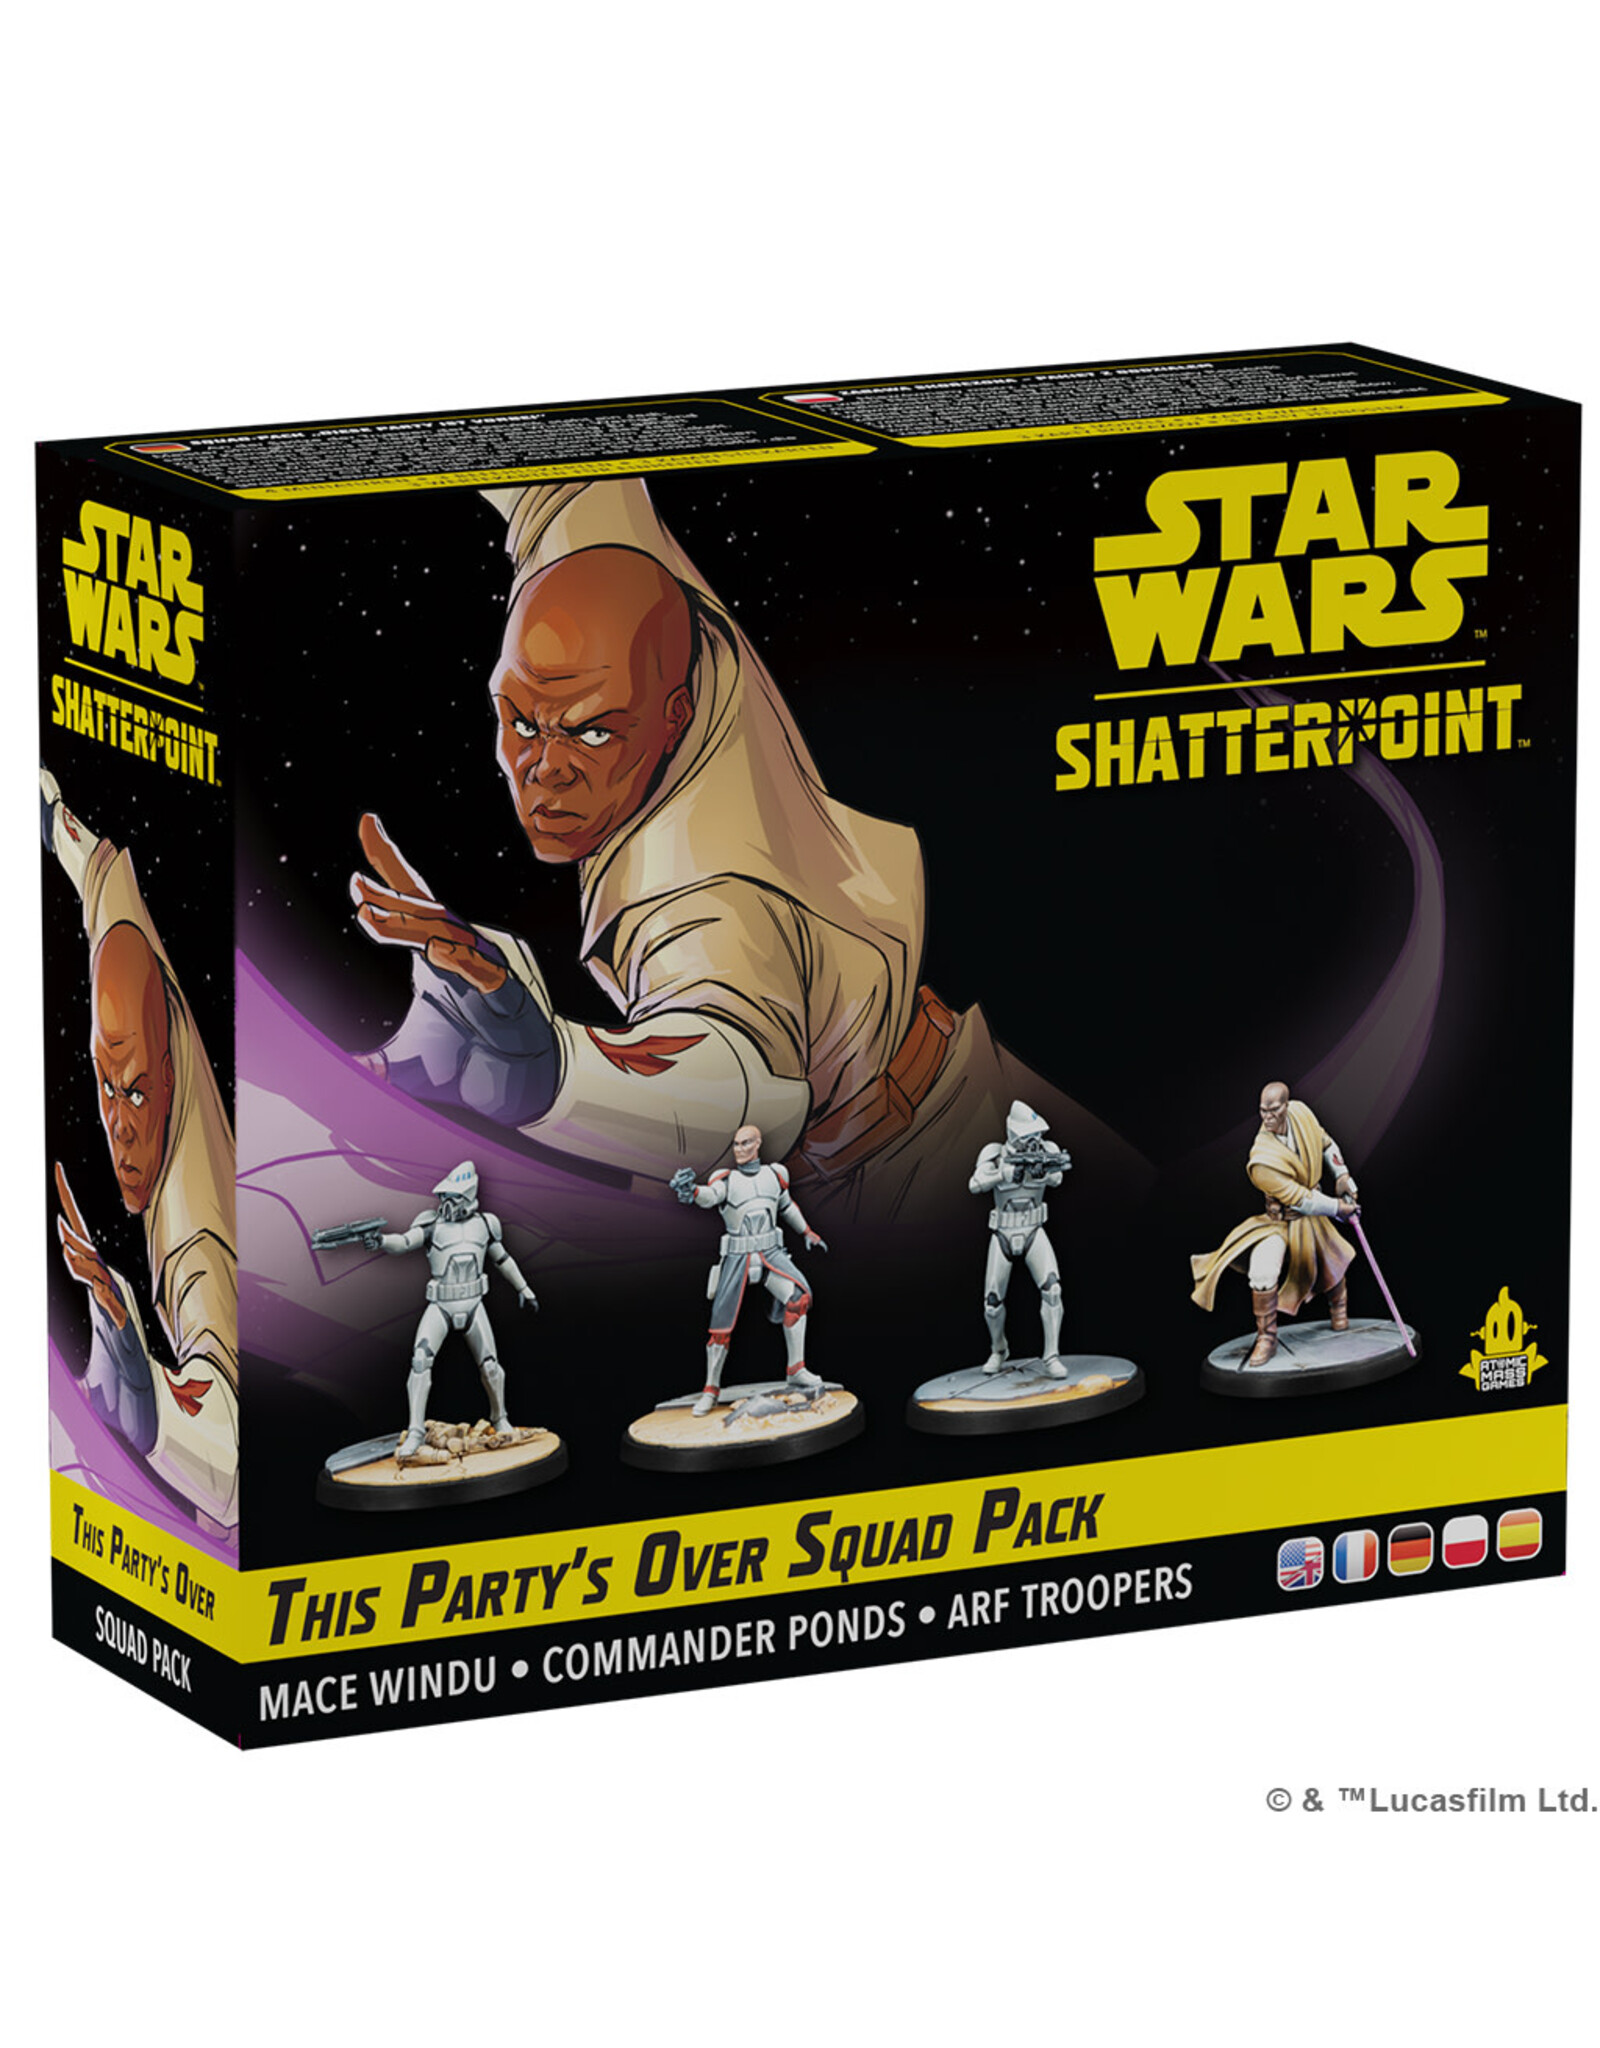 Star Wars Shatterpoint Star Wars Shatterpoint This Party's Over Squad Pack